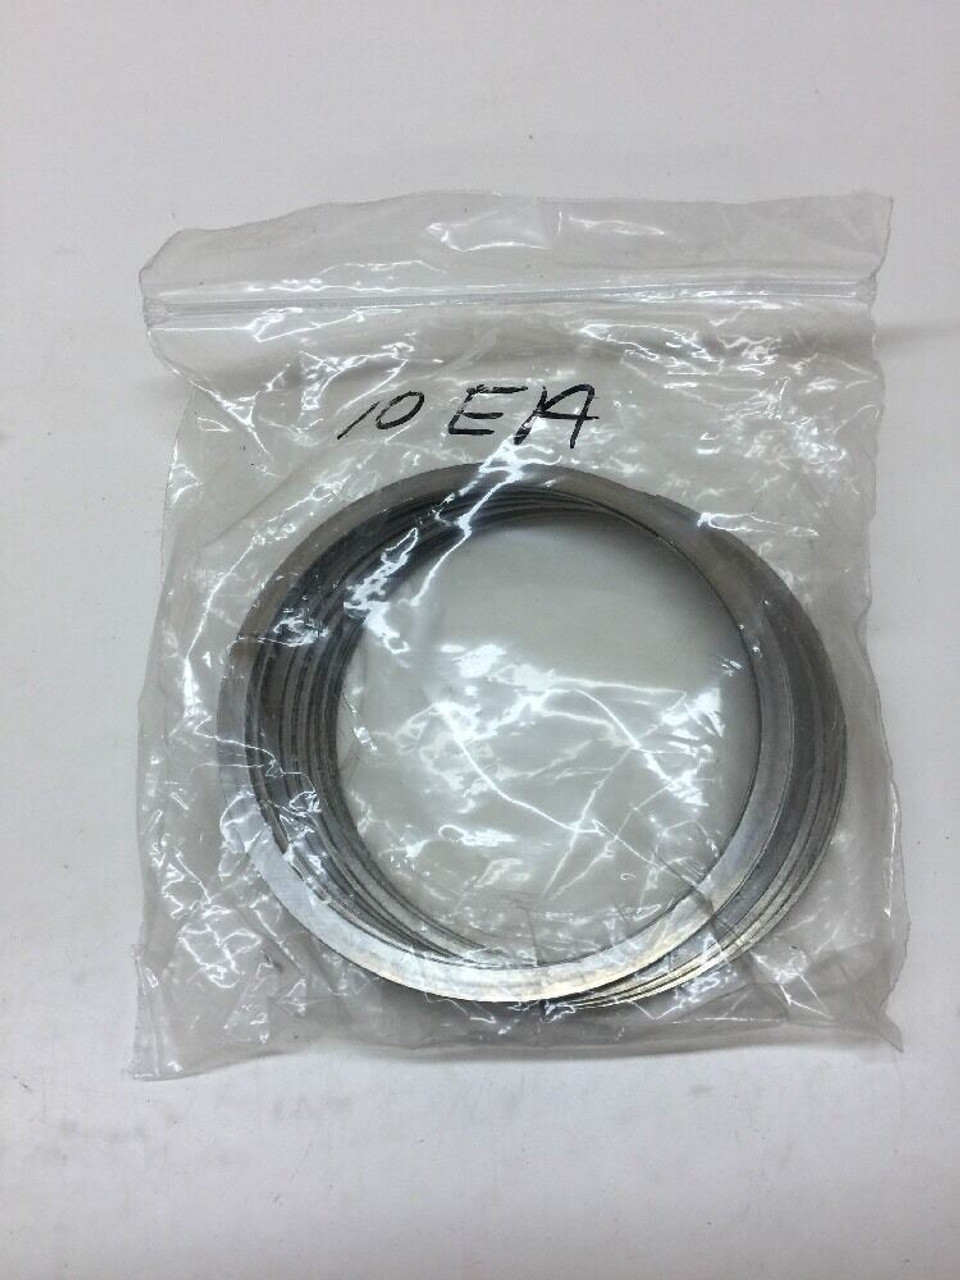 Retaining Ring RR-387-S Bosch Rexroth Steel UH-1 H-4 Helicopter Lot of 10